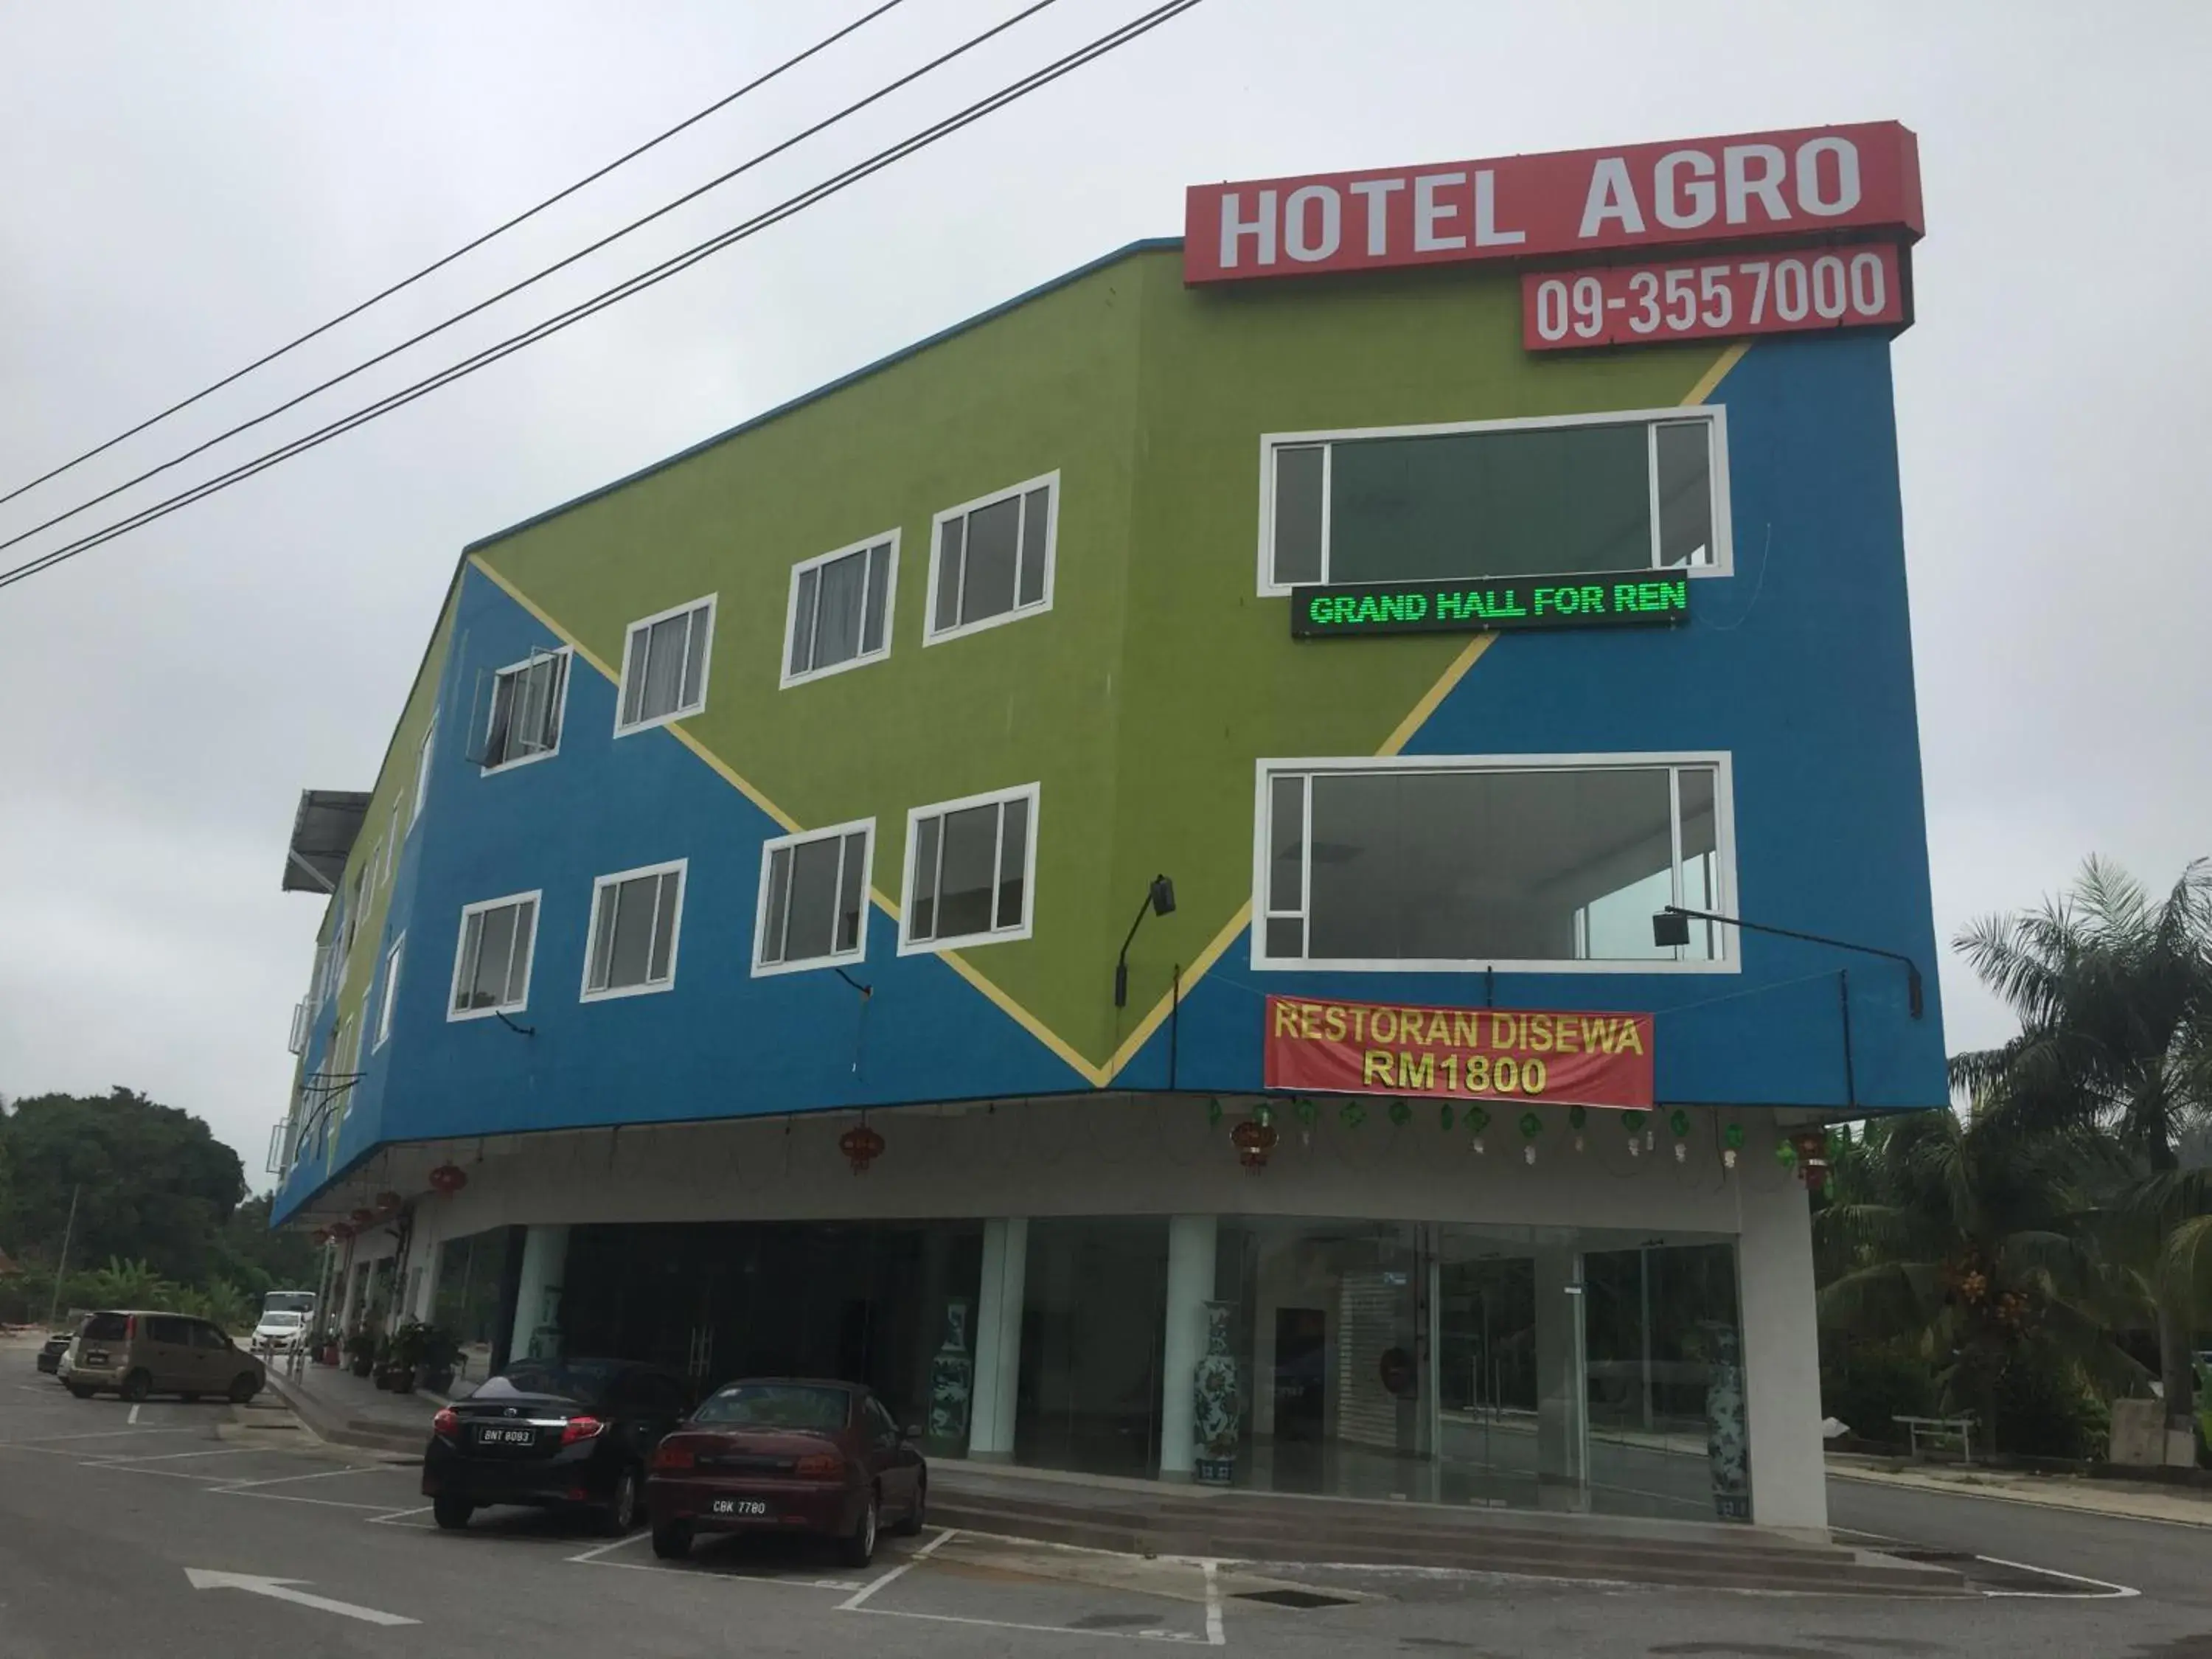 Property Building in Hotel Agro